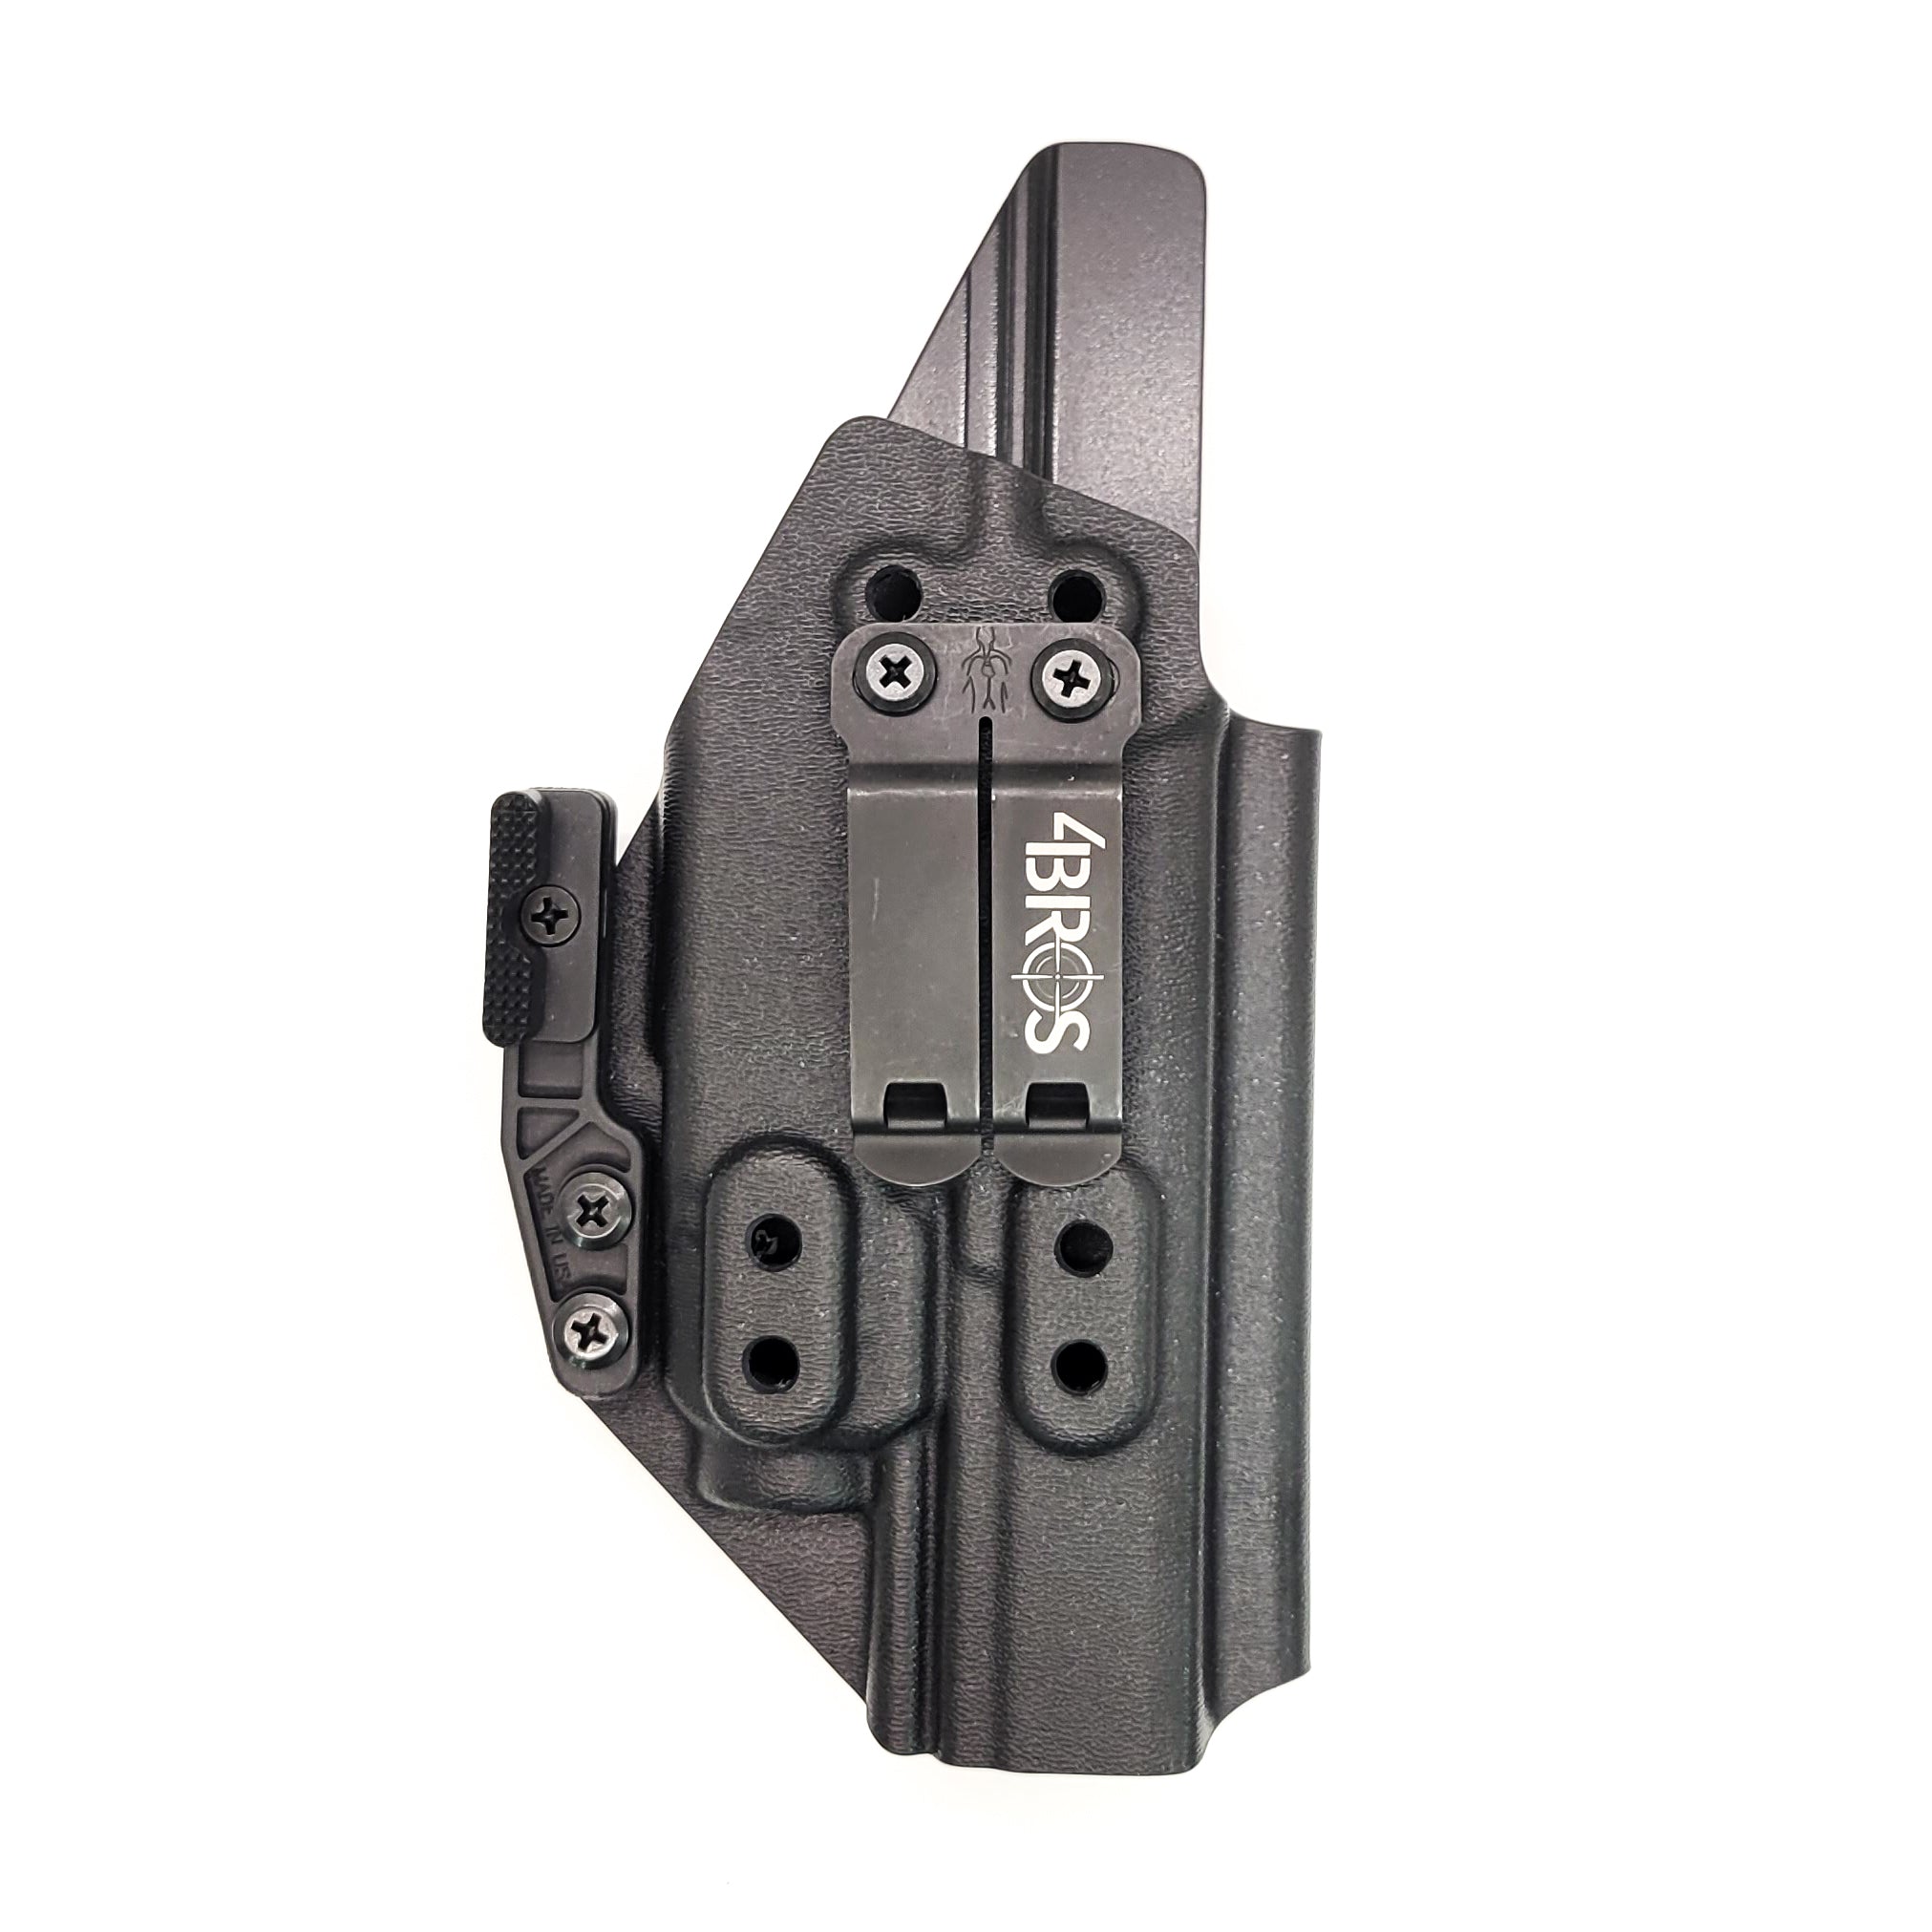 For the best concealed carry Inside Waistband IWB AIWB Holster designed to fit the Walther PDP Pro SD 4.6" pistol with Streamlight TLR-7A or TLR-7 on the firearm, shop Four Brothers Holsters. Cut for red dot sight, full sweat guard, adjustable retention & open muzzle for threaded barrels & compensators. TLR7 ProSD